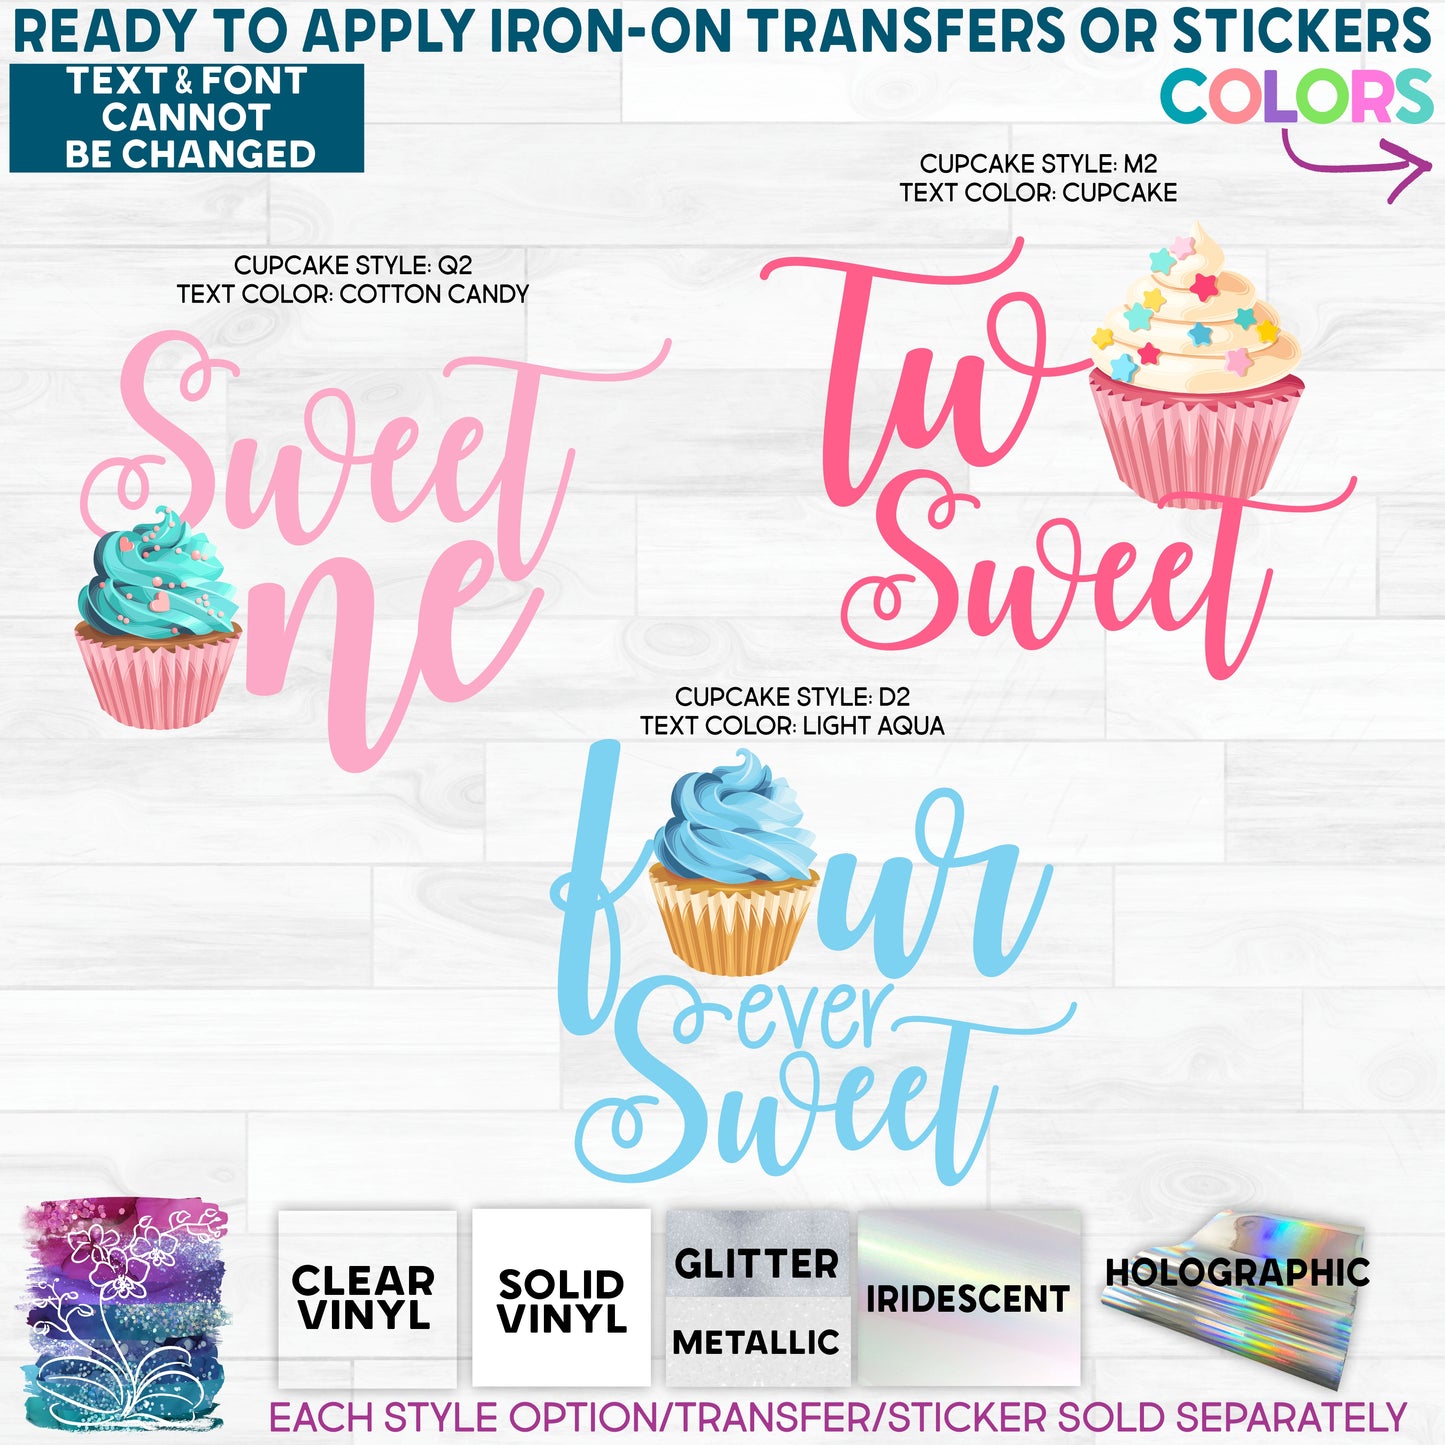 SBS-275-7 Watercolor Cupcake Sweet One Two Sweet Four Ever Sweet More Styles Available! Custom Printed Iron On Transfer or Sticker